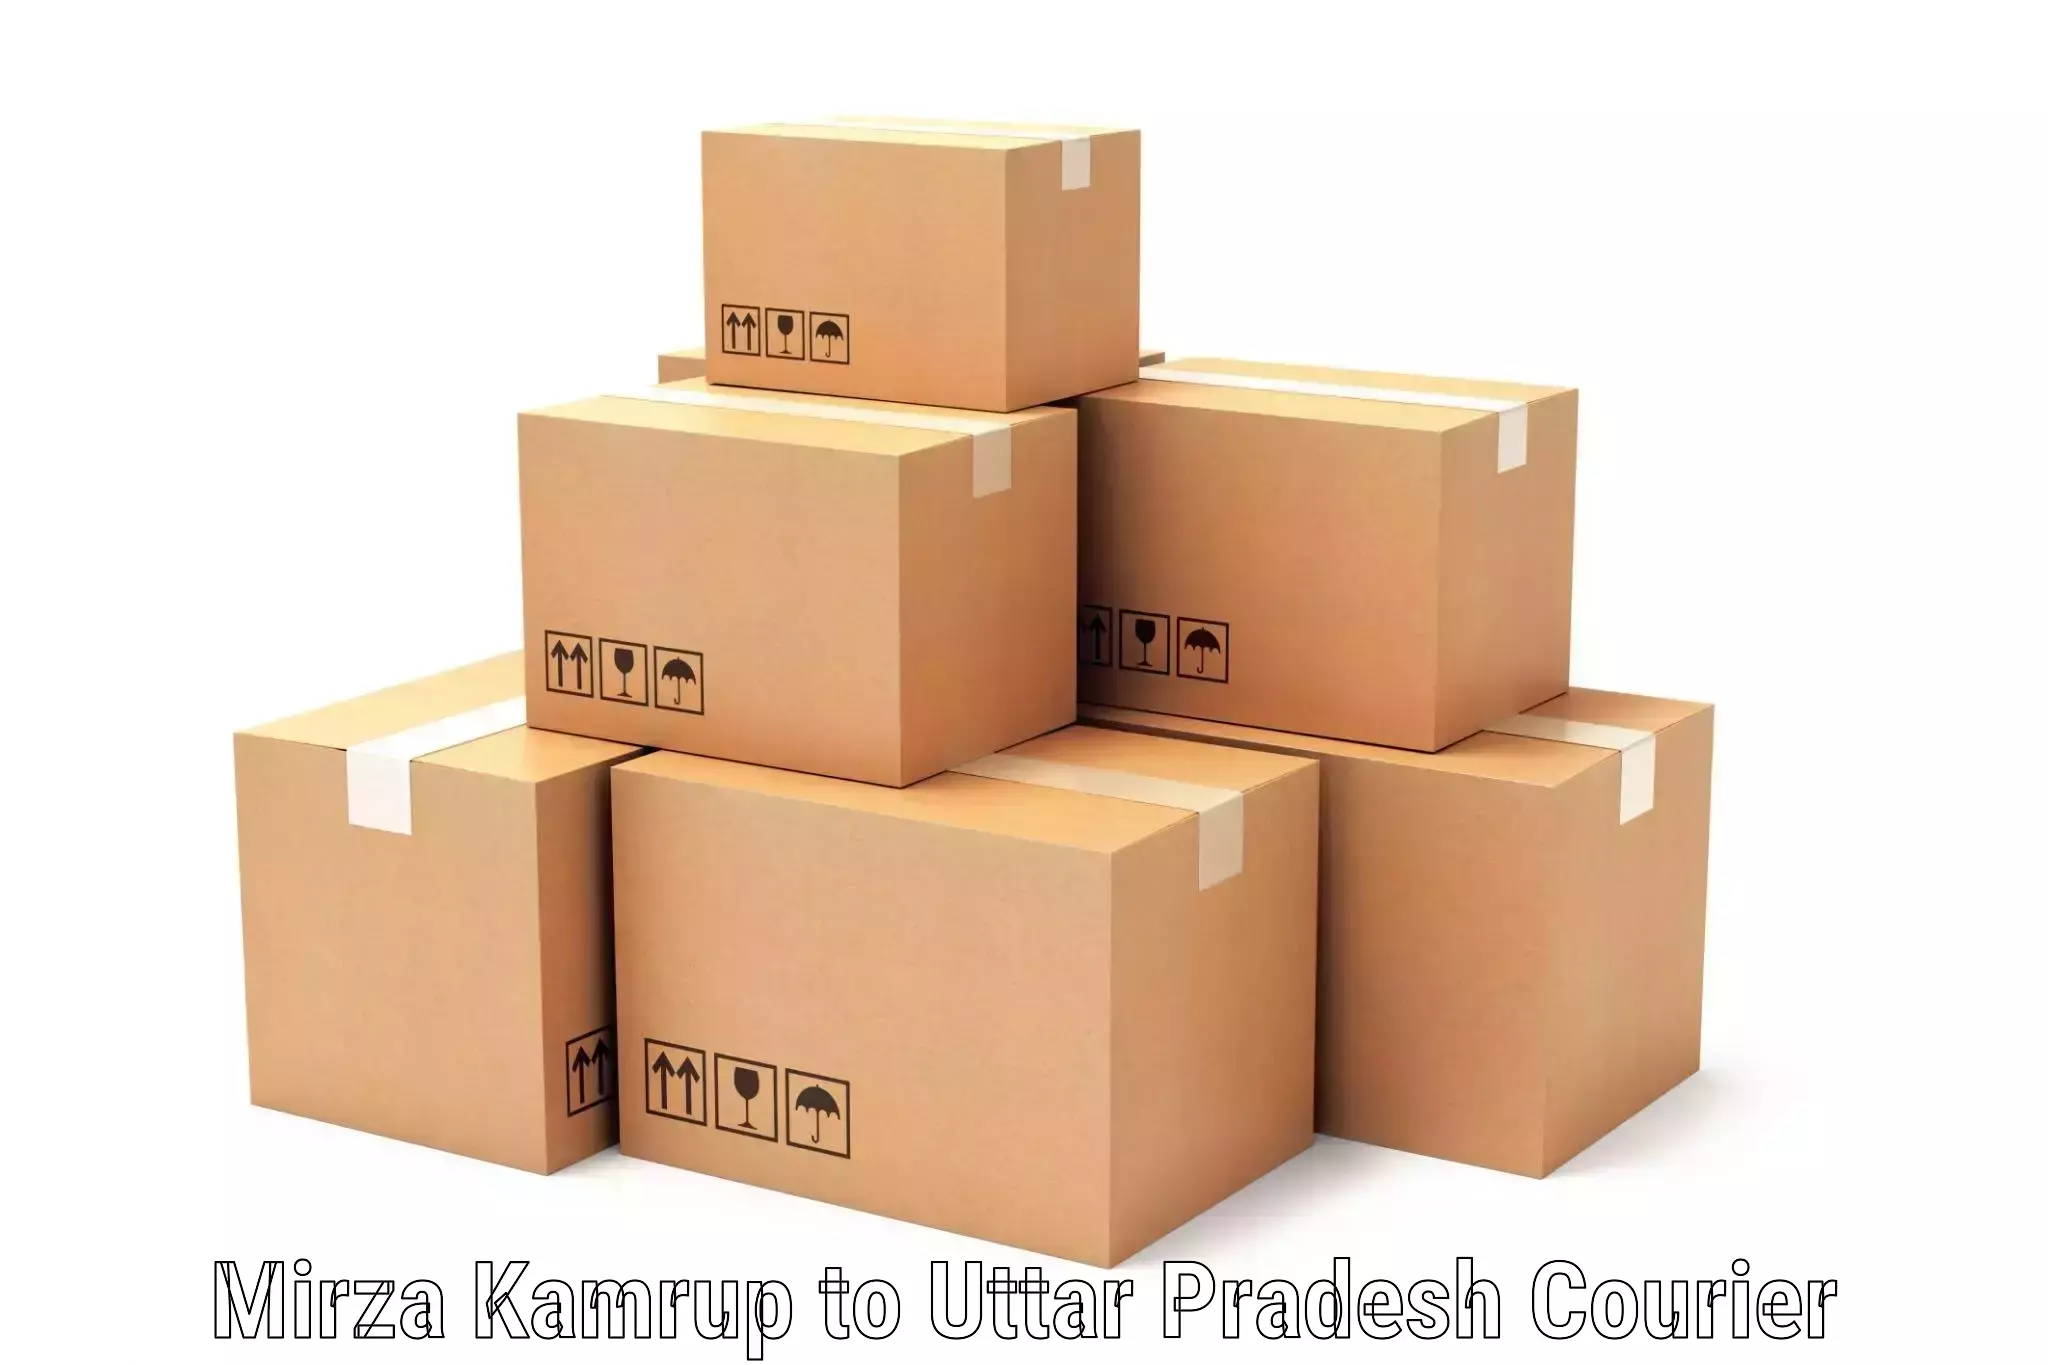 Full-service courier options in Mirza Kamrup to Bighapur